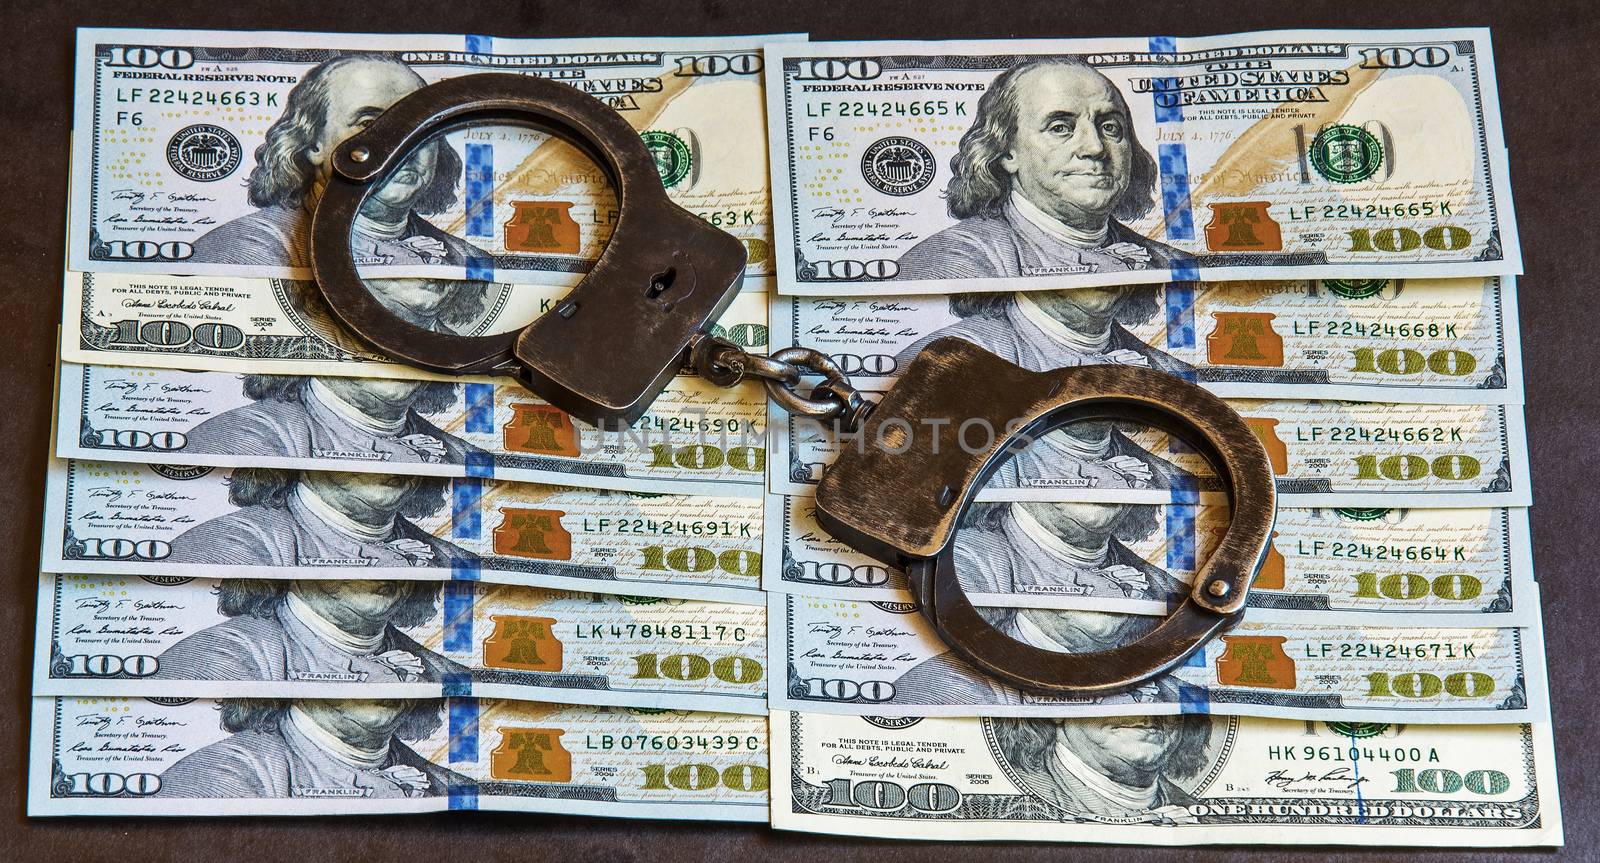 The handcuffs are on banknotes hundred dollars by Grommik